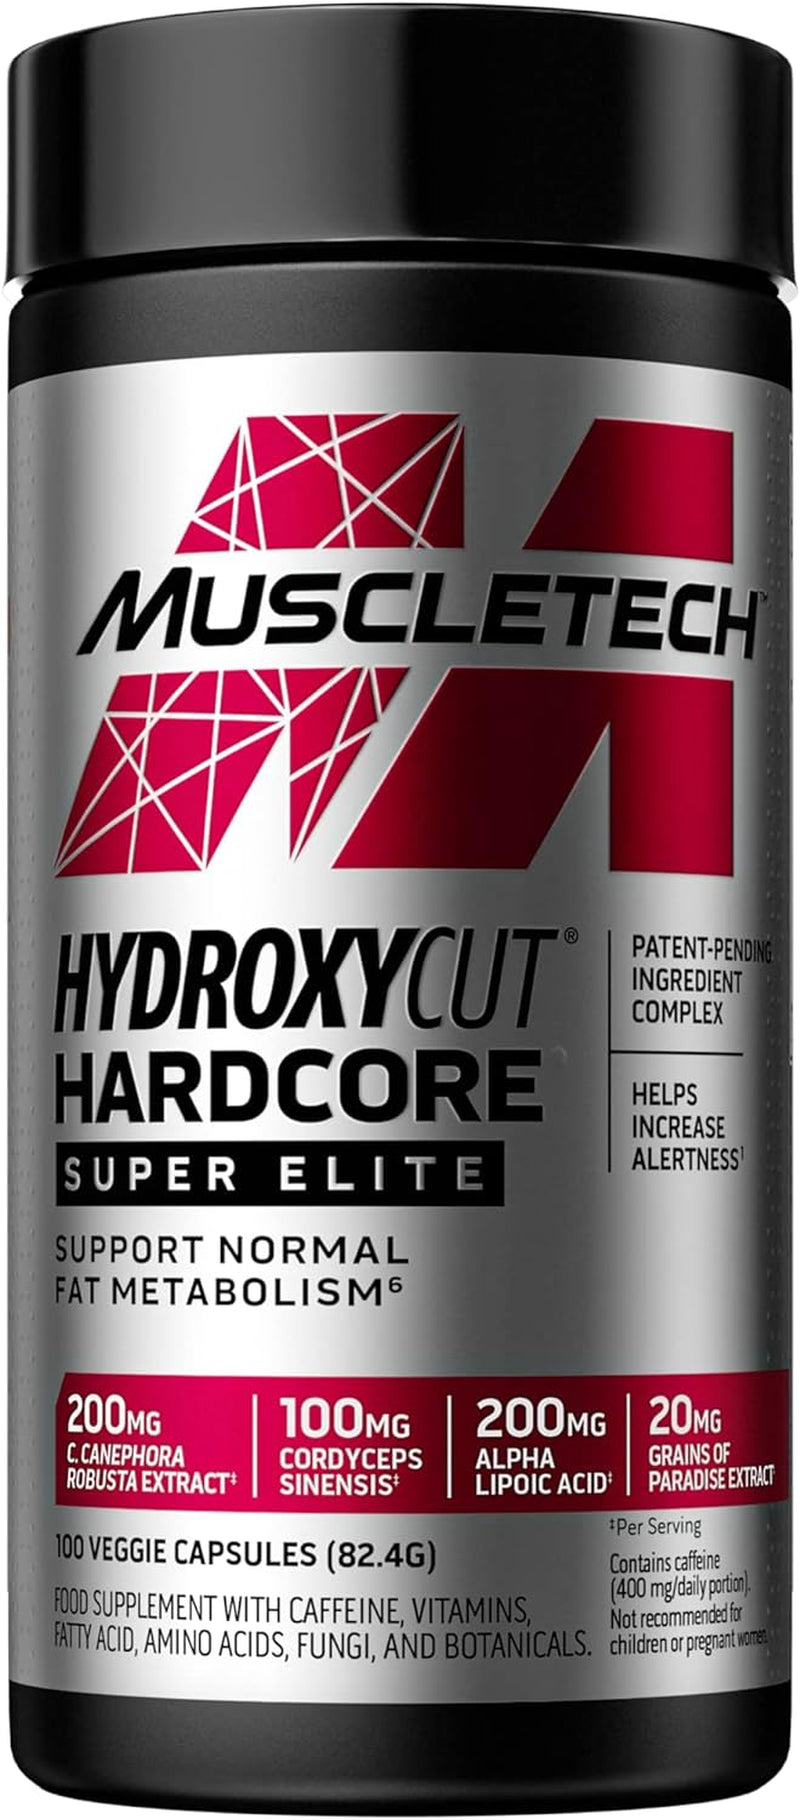 Weight Loss Hydroxycut Hardcore Super Elite Slimming Pills, Immune System Vitamins - B12 B6, Increase Alertness & Performance, Support Fat Metabolism, 100 Count